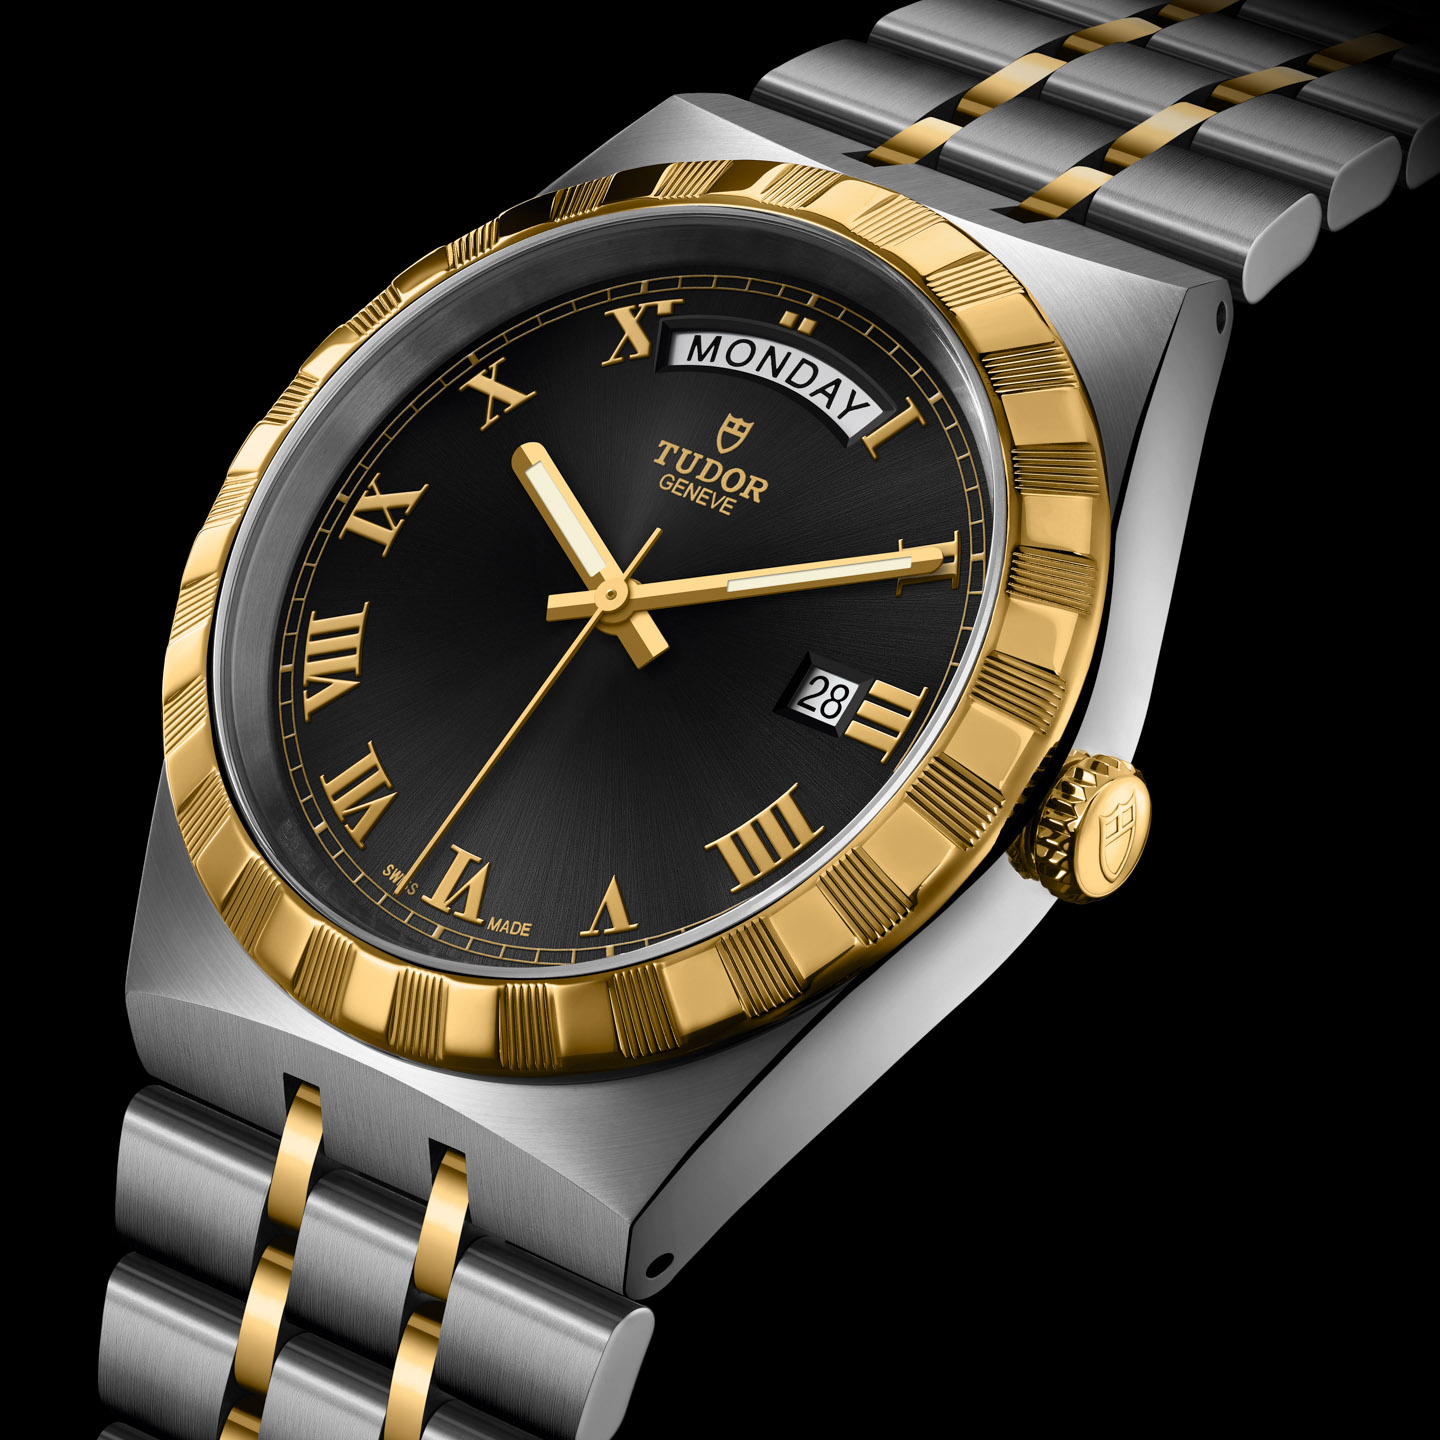 tudor watches made by rolex